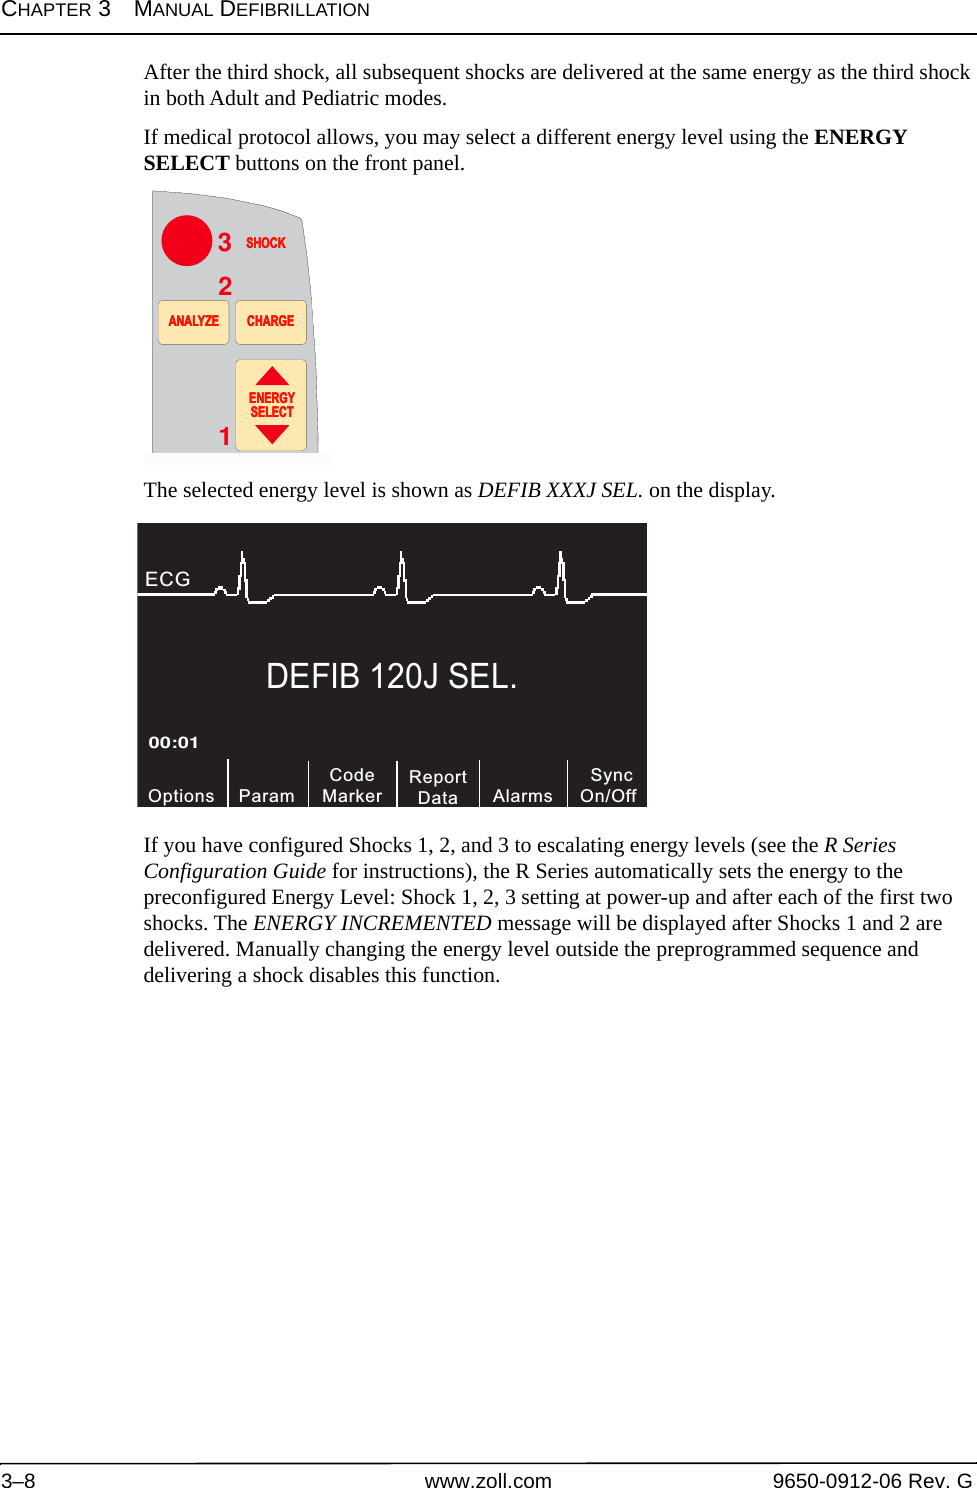 CHAPTER 3MANUAL DEFIBRILLATION3–8 www.zoll.com 9650-0912-06 Rev. GAfter the third shock, all subsequent shocks are delivered at the same energy as the third shock in both Adult and Pediatric modes.If medical protocol allows, you may select a different energy level using the ENERGY SELECT buttons on the front panel.The selected energy level is shown as DEFIB XXXJ SEL. on the display.If you have configured Shocks 1, 2, and 3 to escalating energy levels (see the R Series Configuration Guide for instructions), the R Series automatically sets the energy to the preconfigured Energy Level: Shock 1, 2, 3 setting at power-up and after each of the first two shocks. The ENERGY INCREMENTED message will be displayed after Shocks 1 and 2 are delivered. Manually changing the energy level outside the preprogrammed sequence and delivering a shock disables this function. 3SHOCKSHOCKENERGYSELECTENERGYSELECTANALYZEANALYZE CHARGECHARGE21DEFIB 120J SEL.CodeMarkerOptions00:01ECG ParamReportData SyncOn/OffAlarms